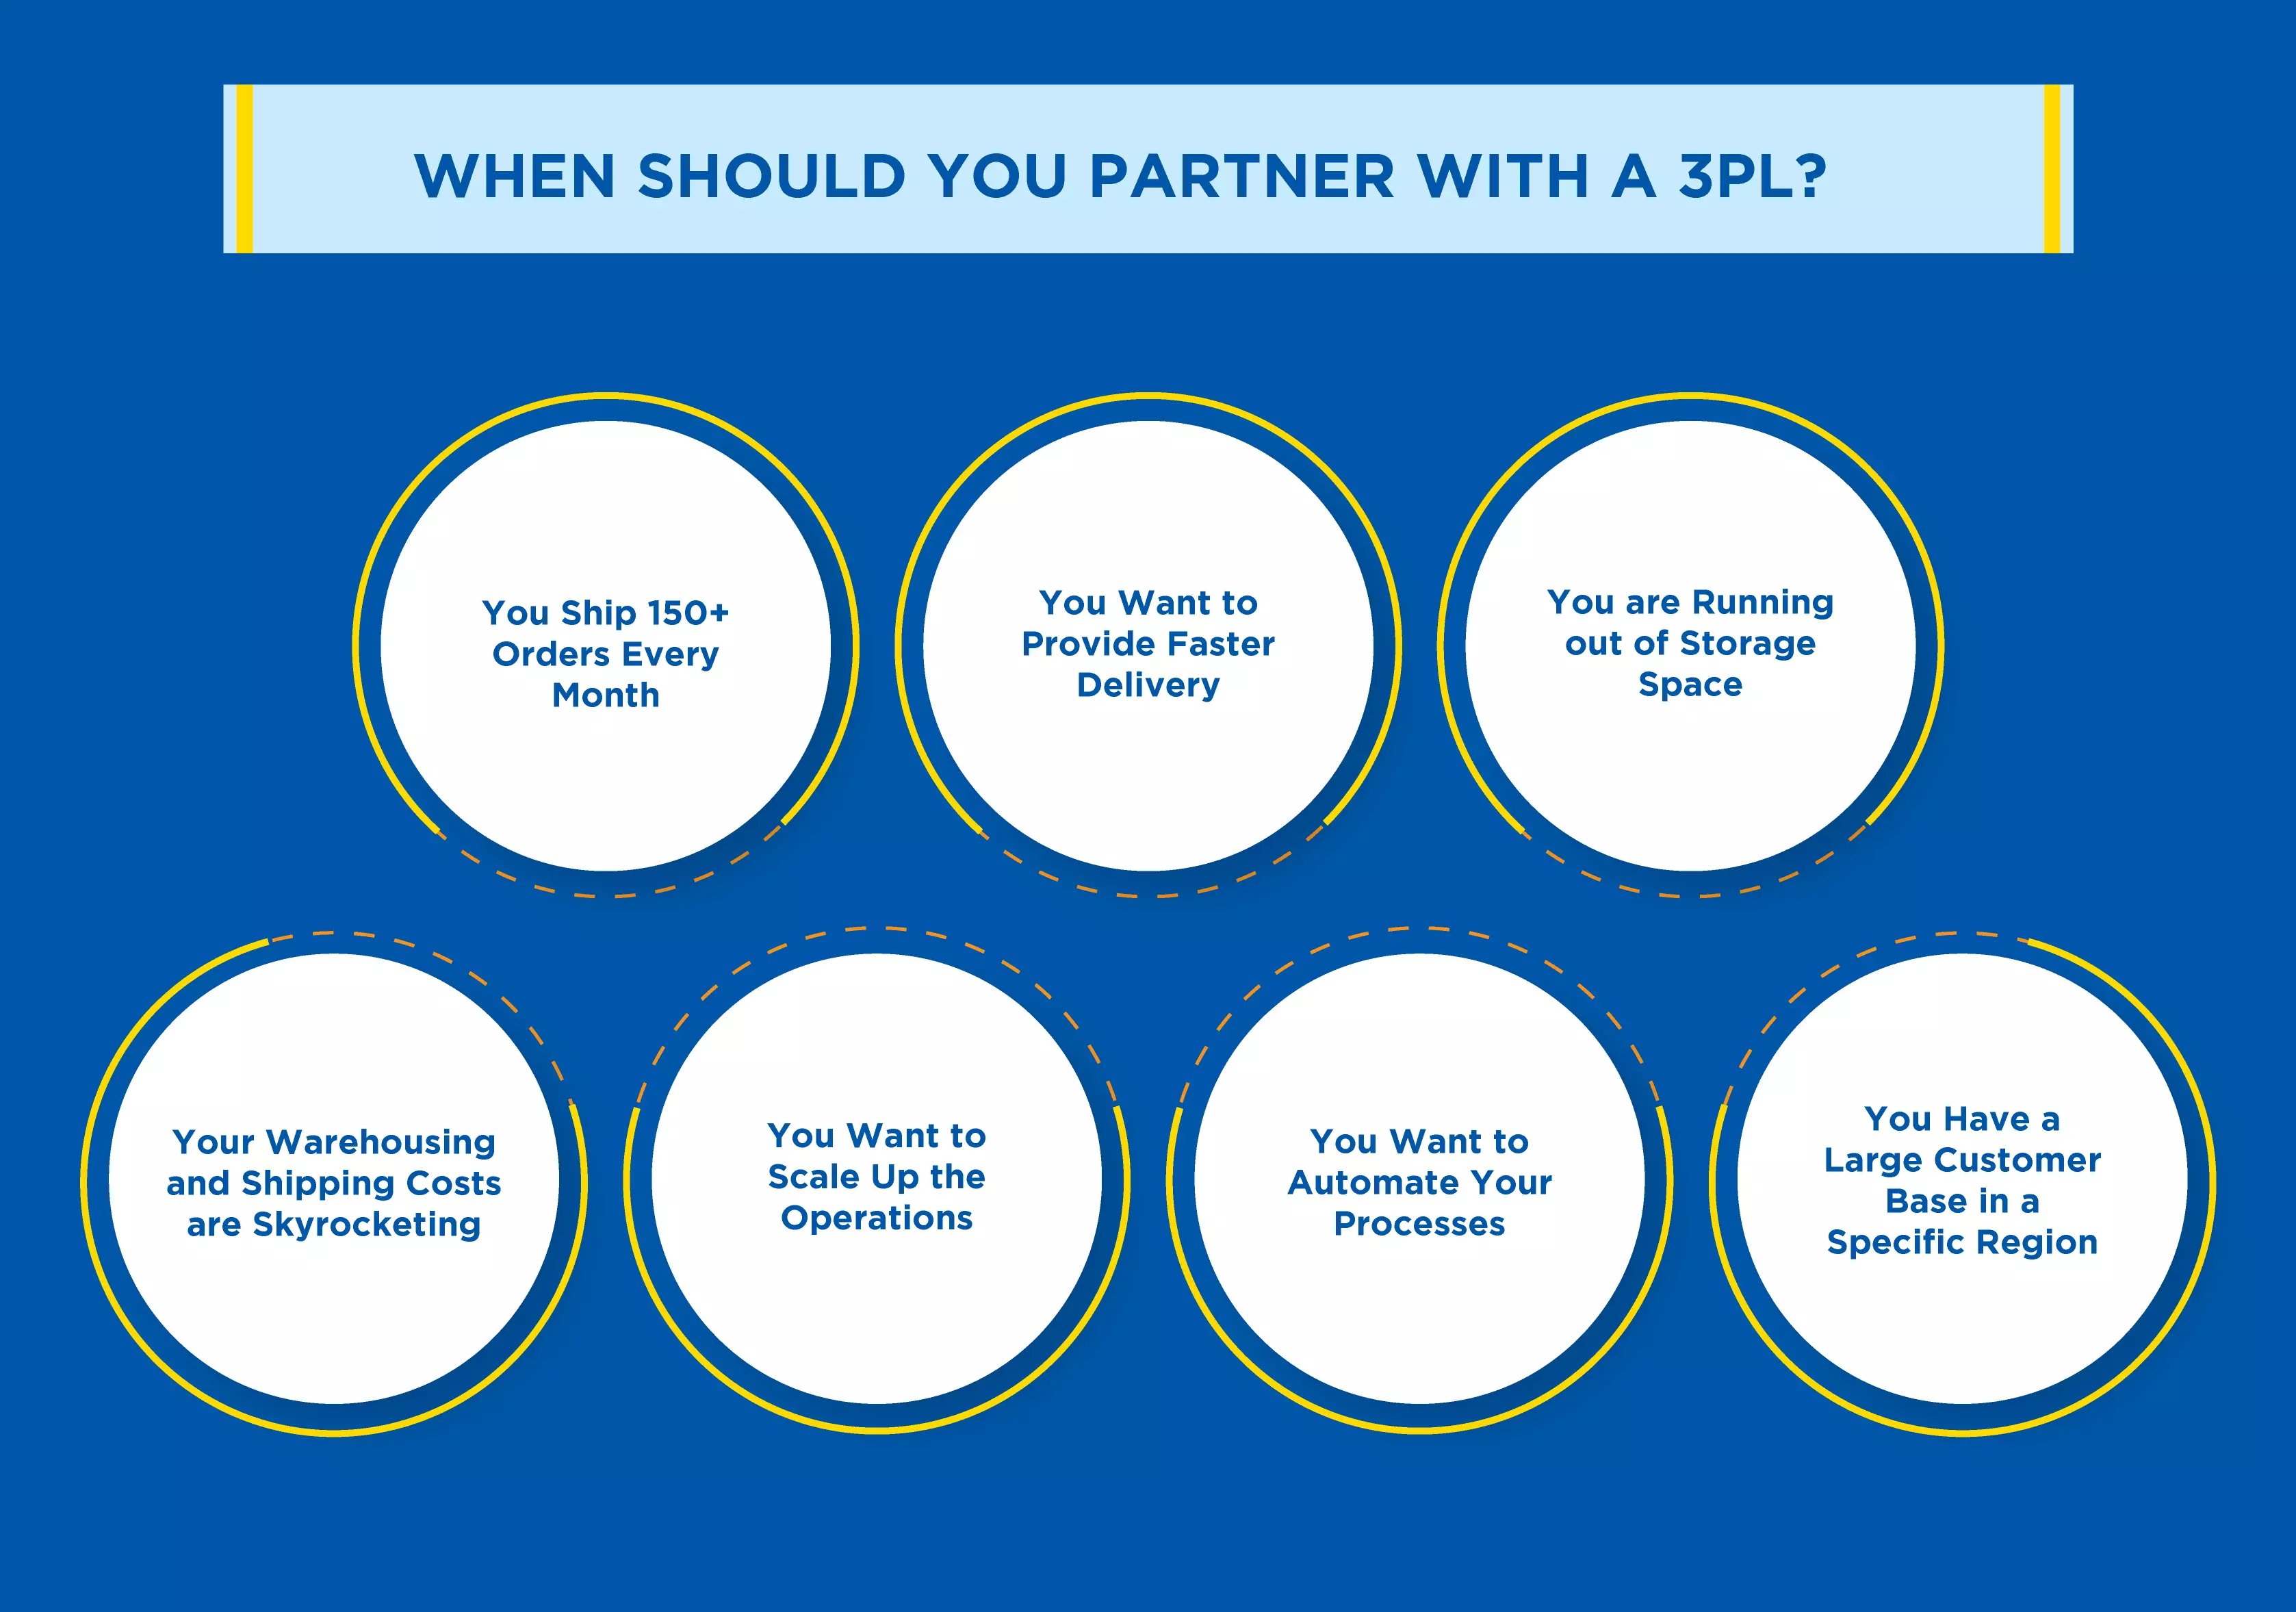 When Should You Partner with a 3PL